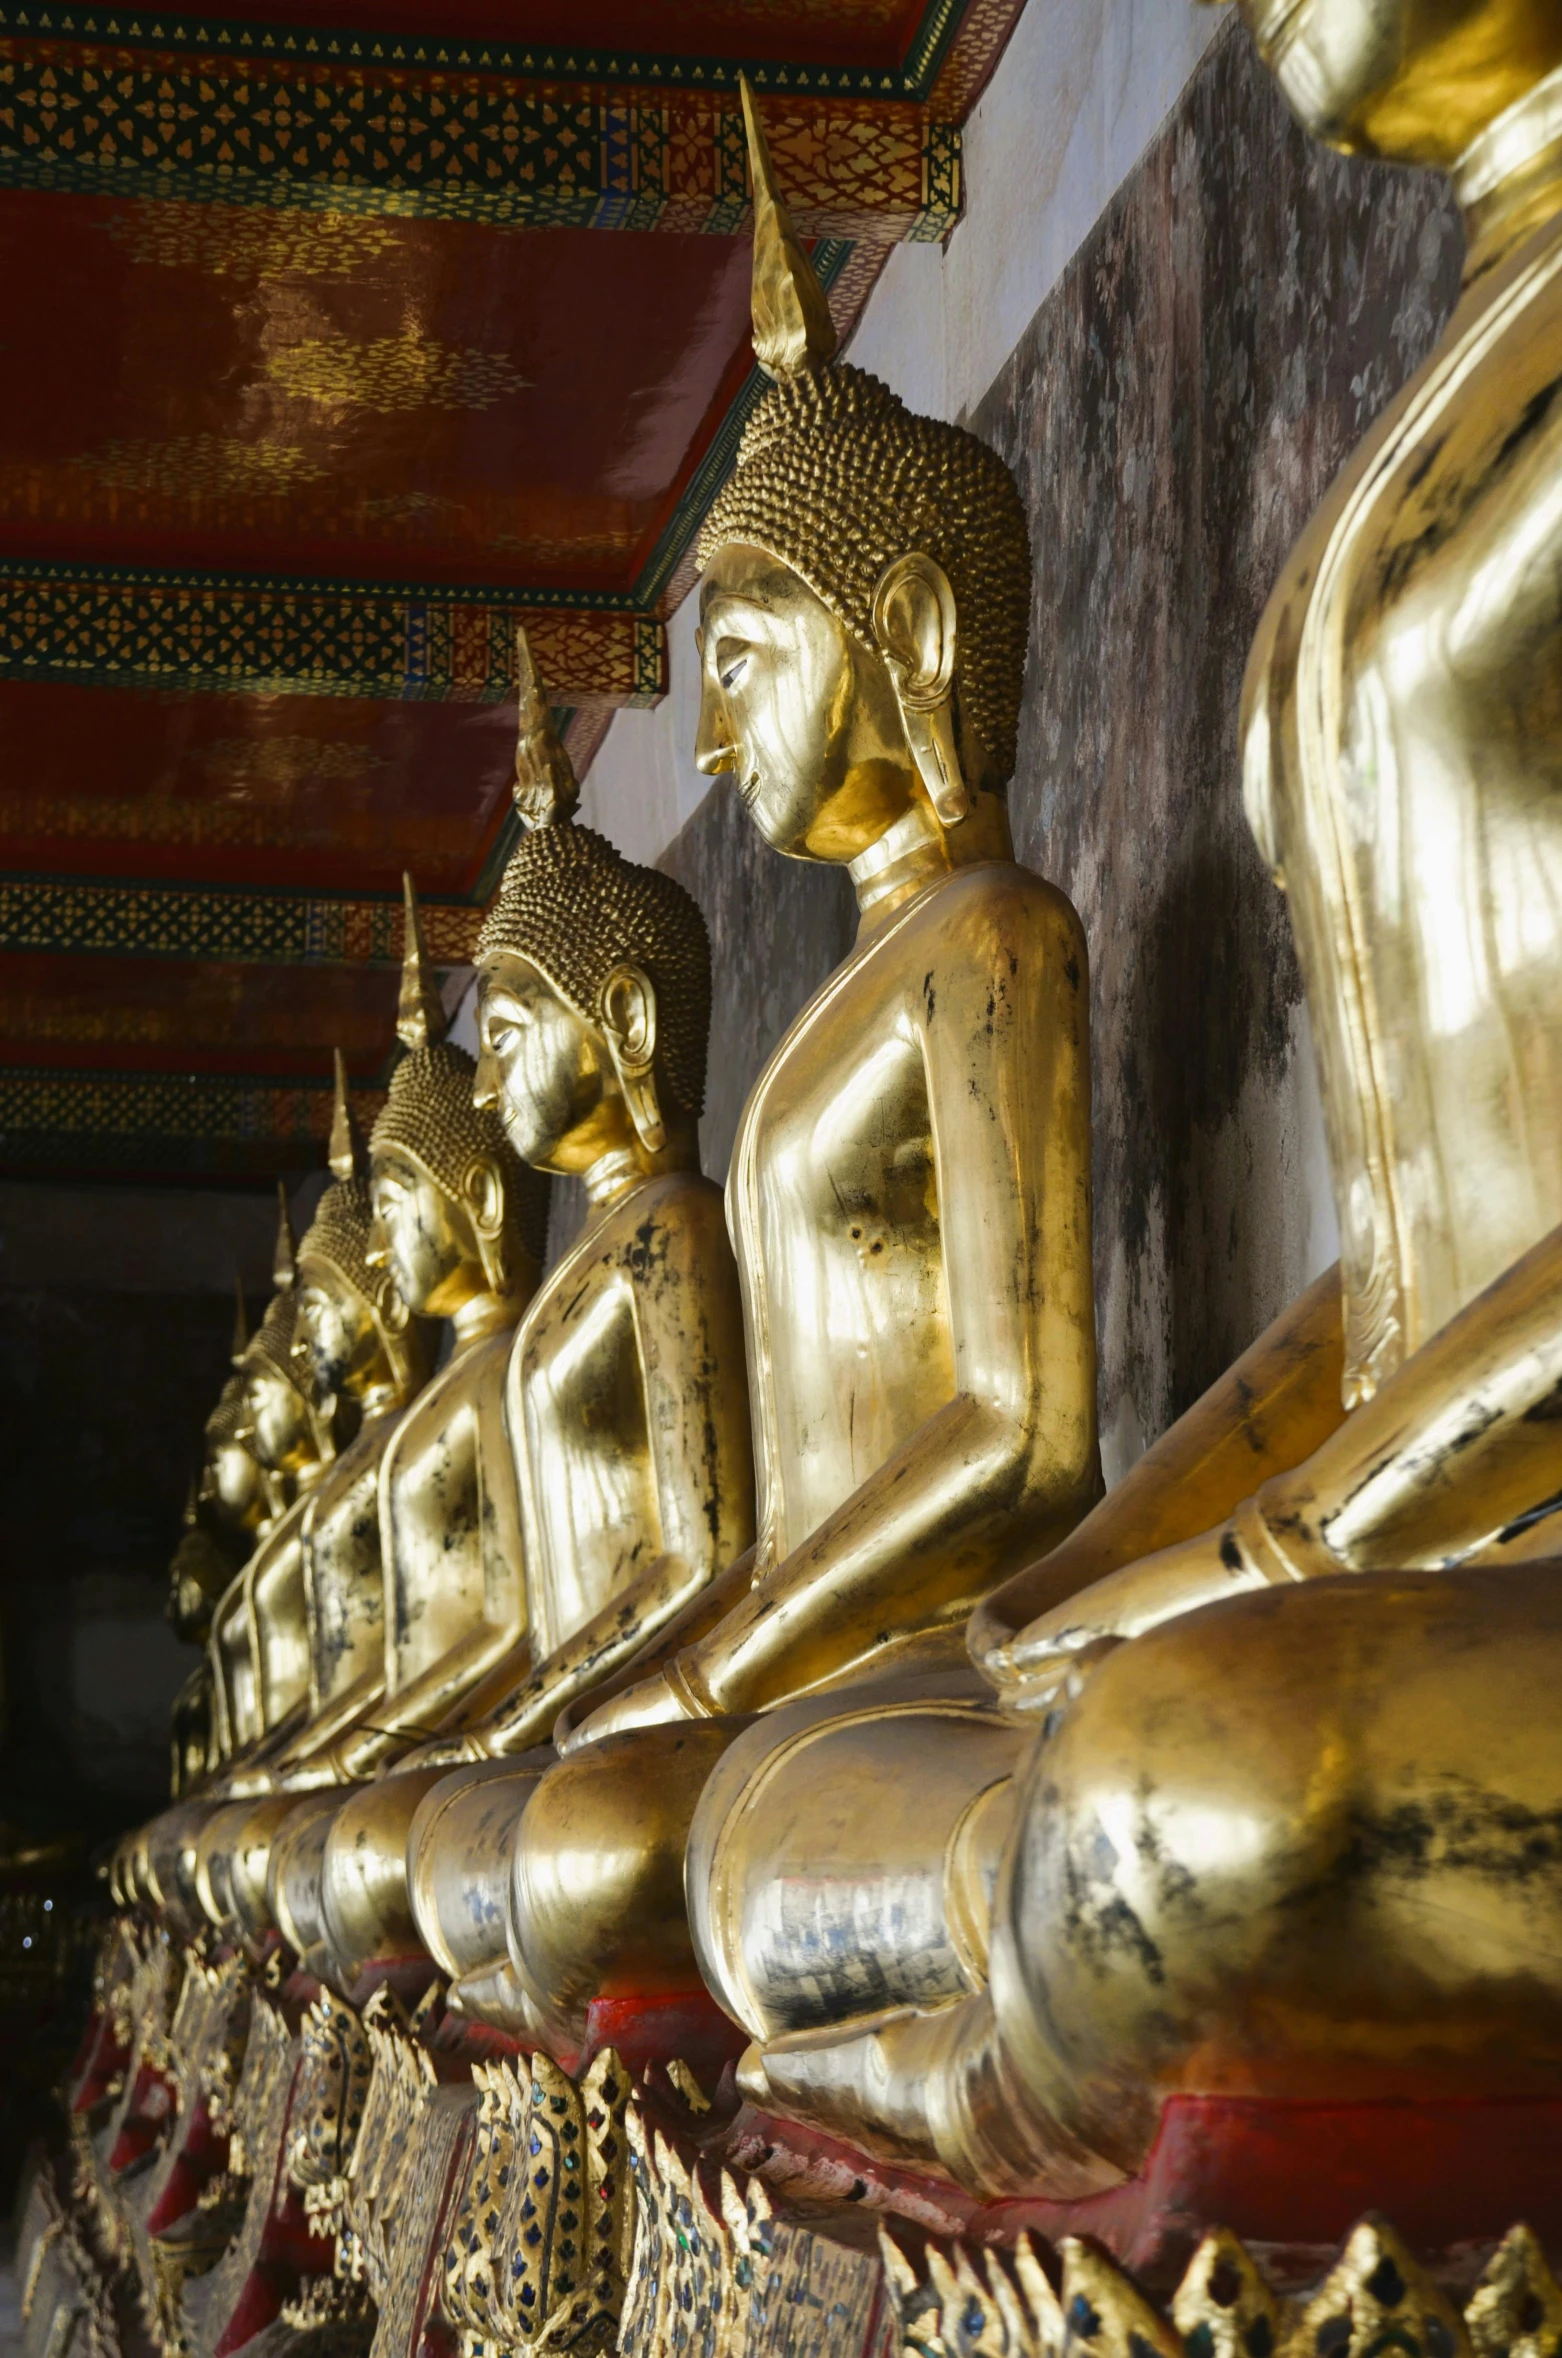 the golden statues line the walls in this asian style temple